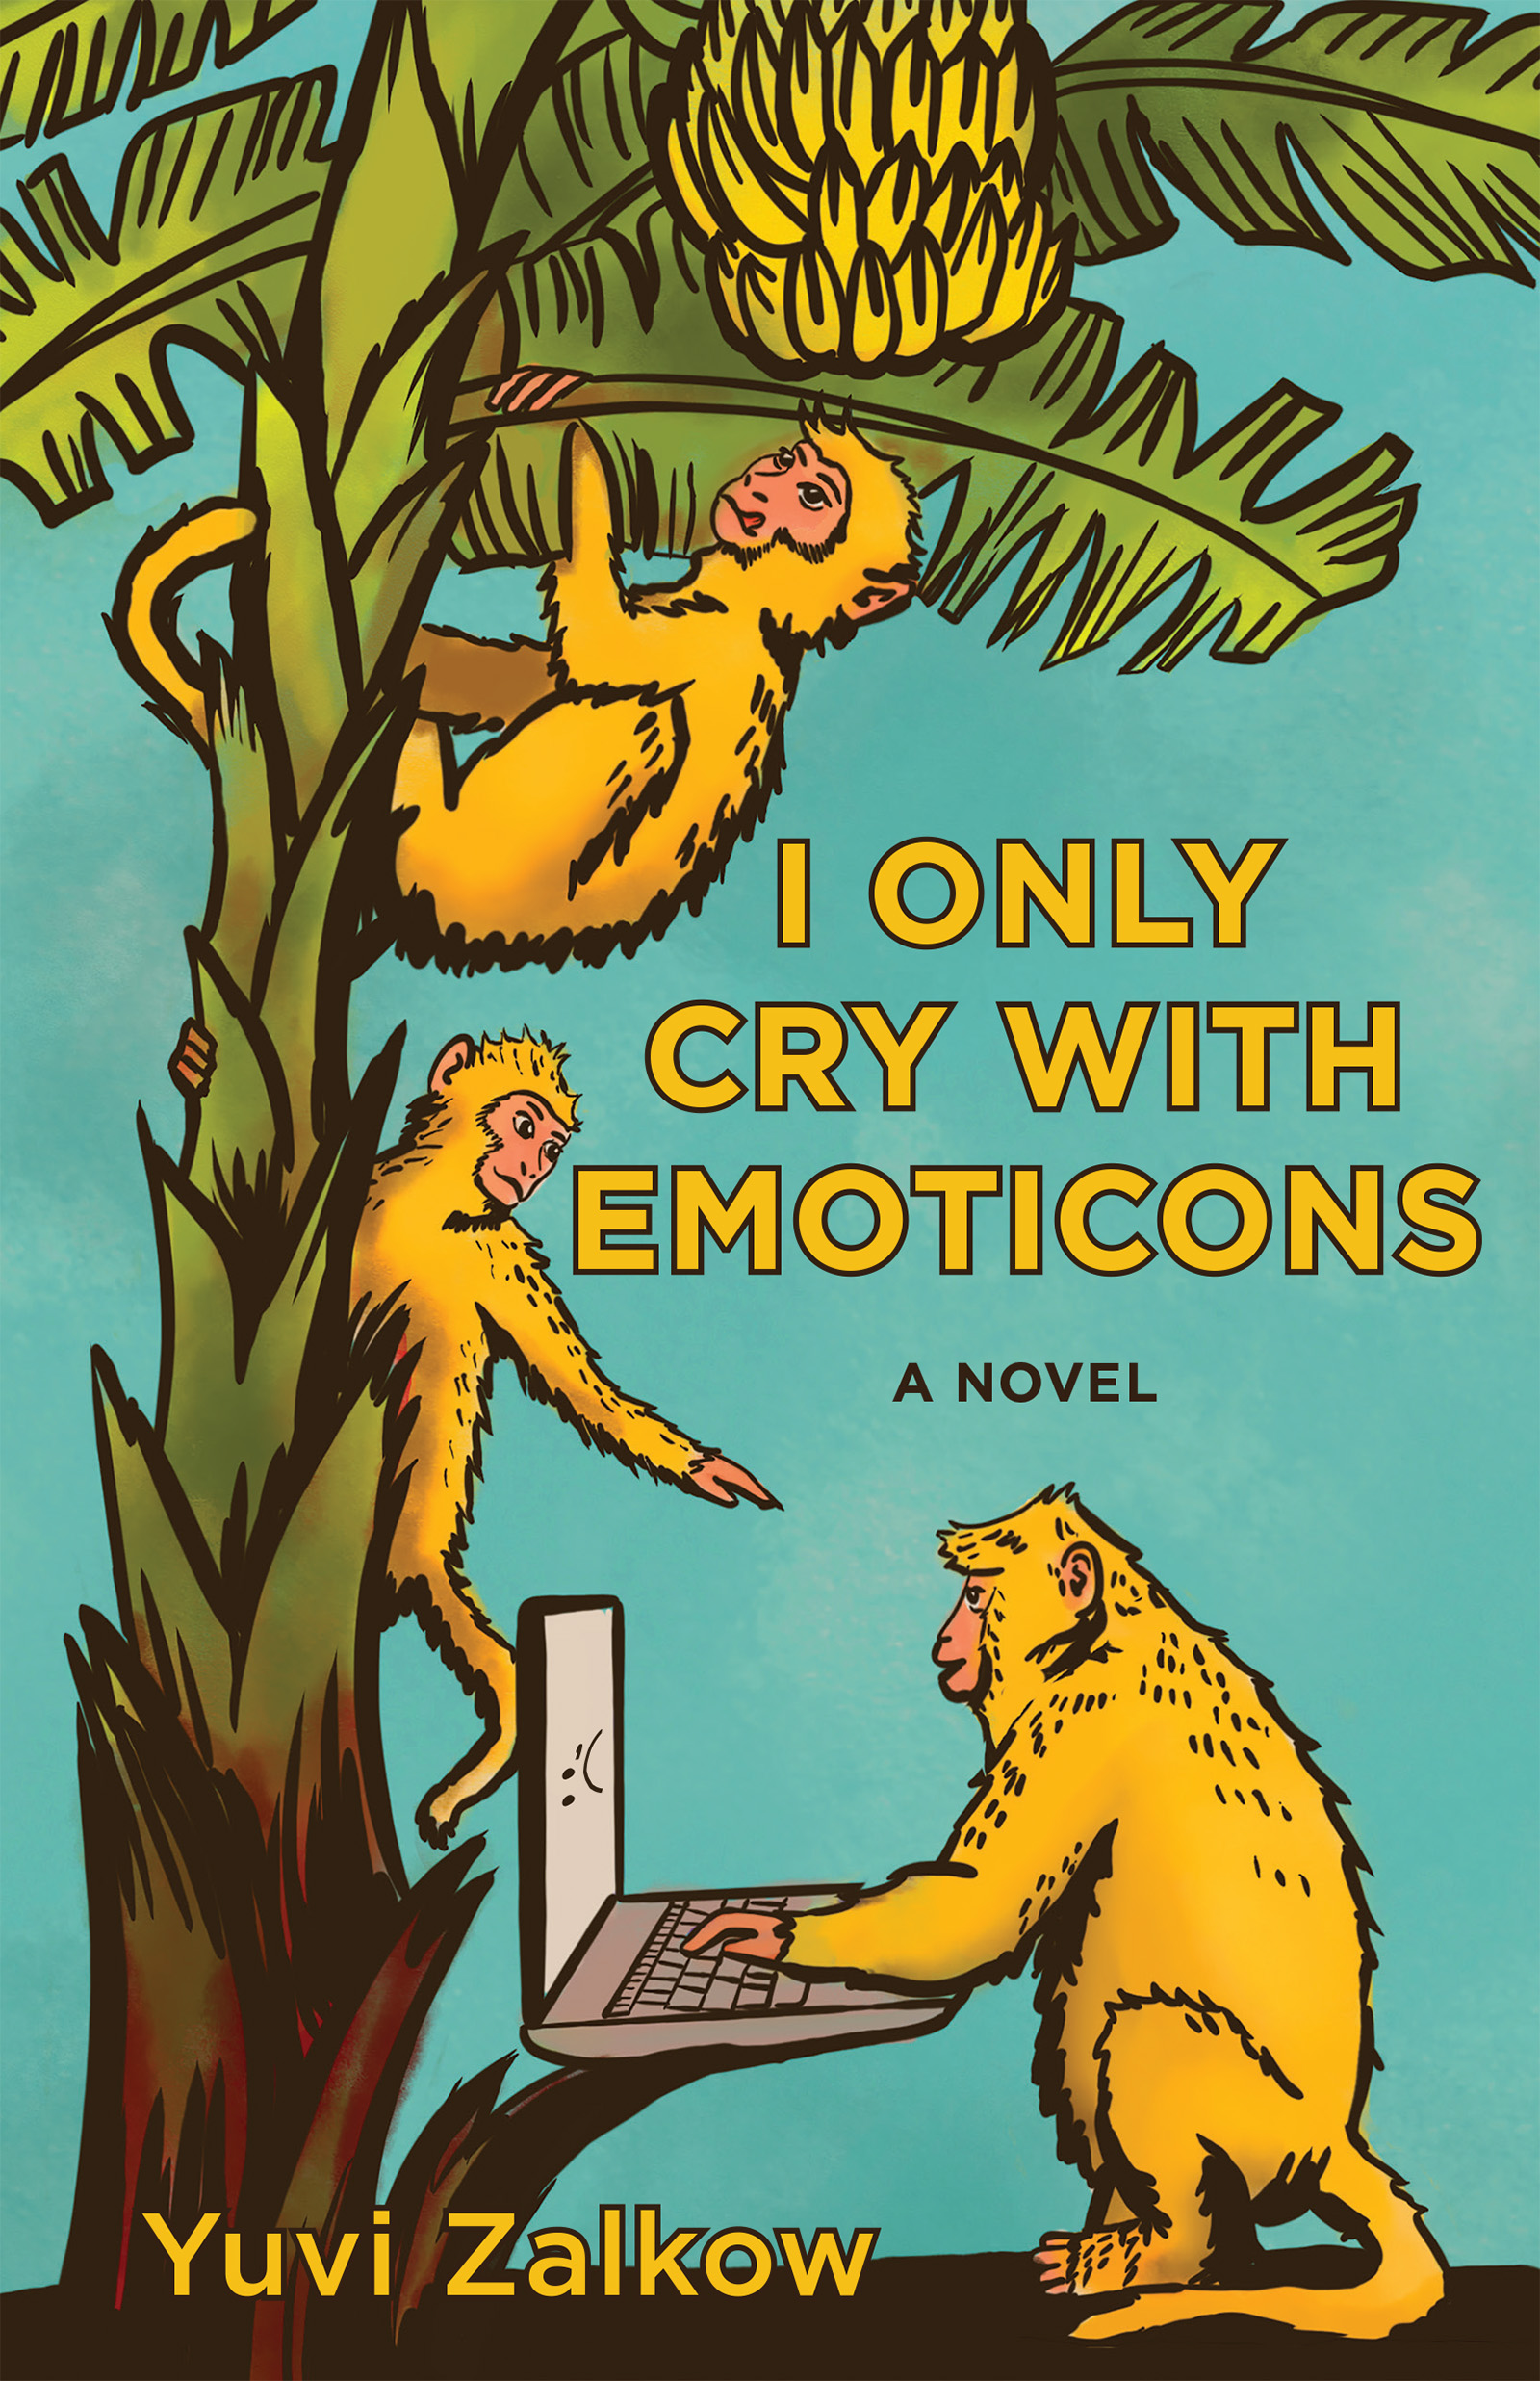 Yellow text stating I Only Cry With Emoticons A Novel by Yuvi Zulkow over a bright blue background with the image of 2 monkeys climbing a banana tree and one monkey on a computer.